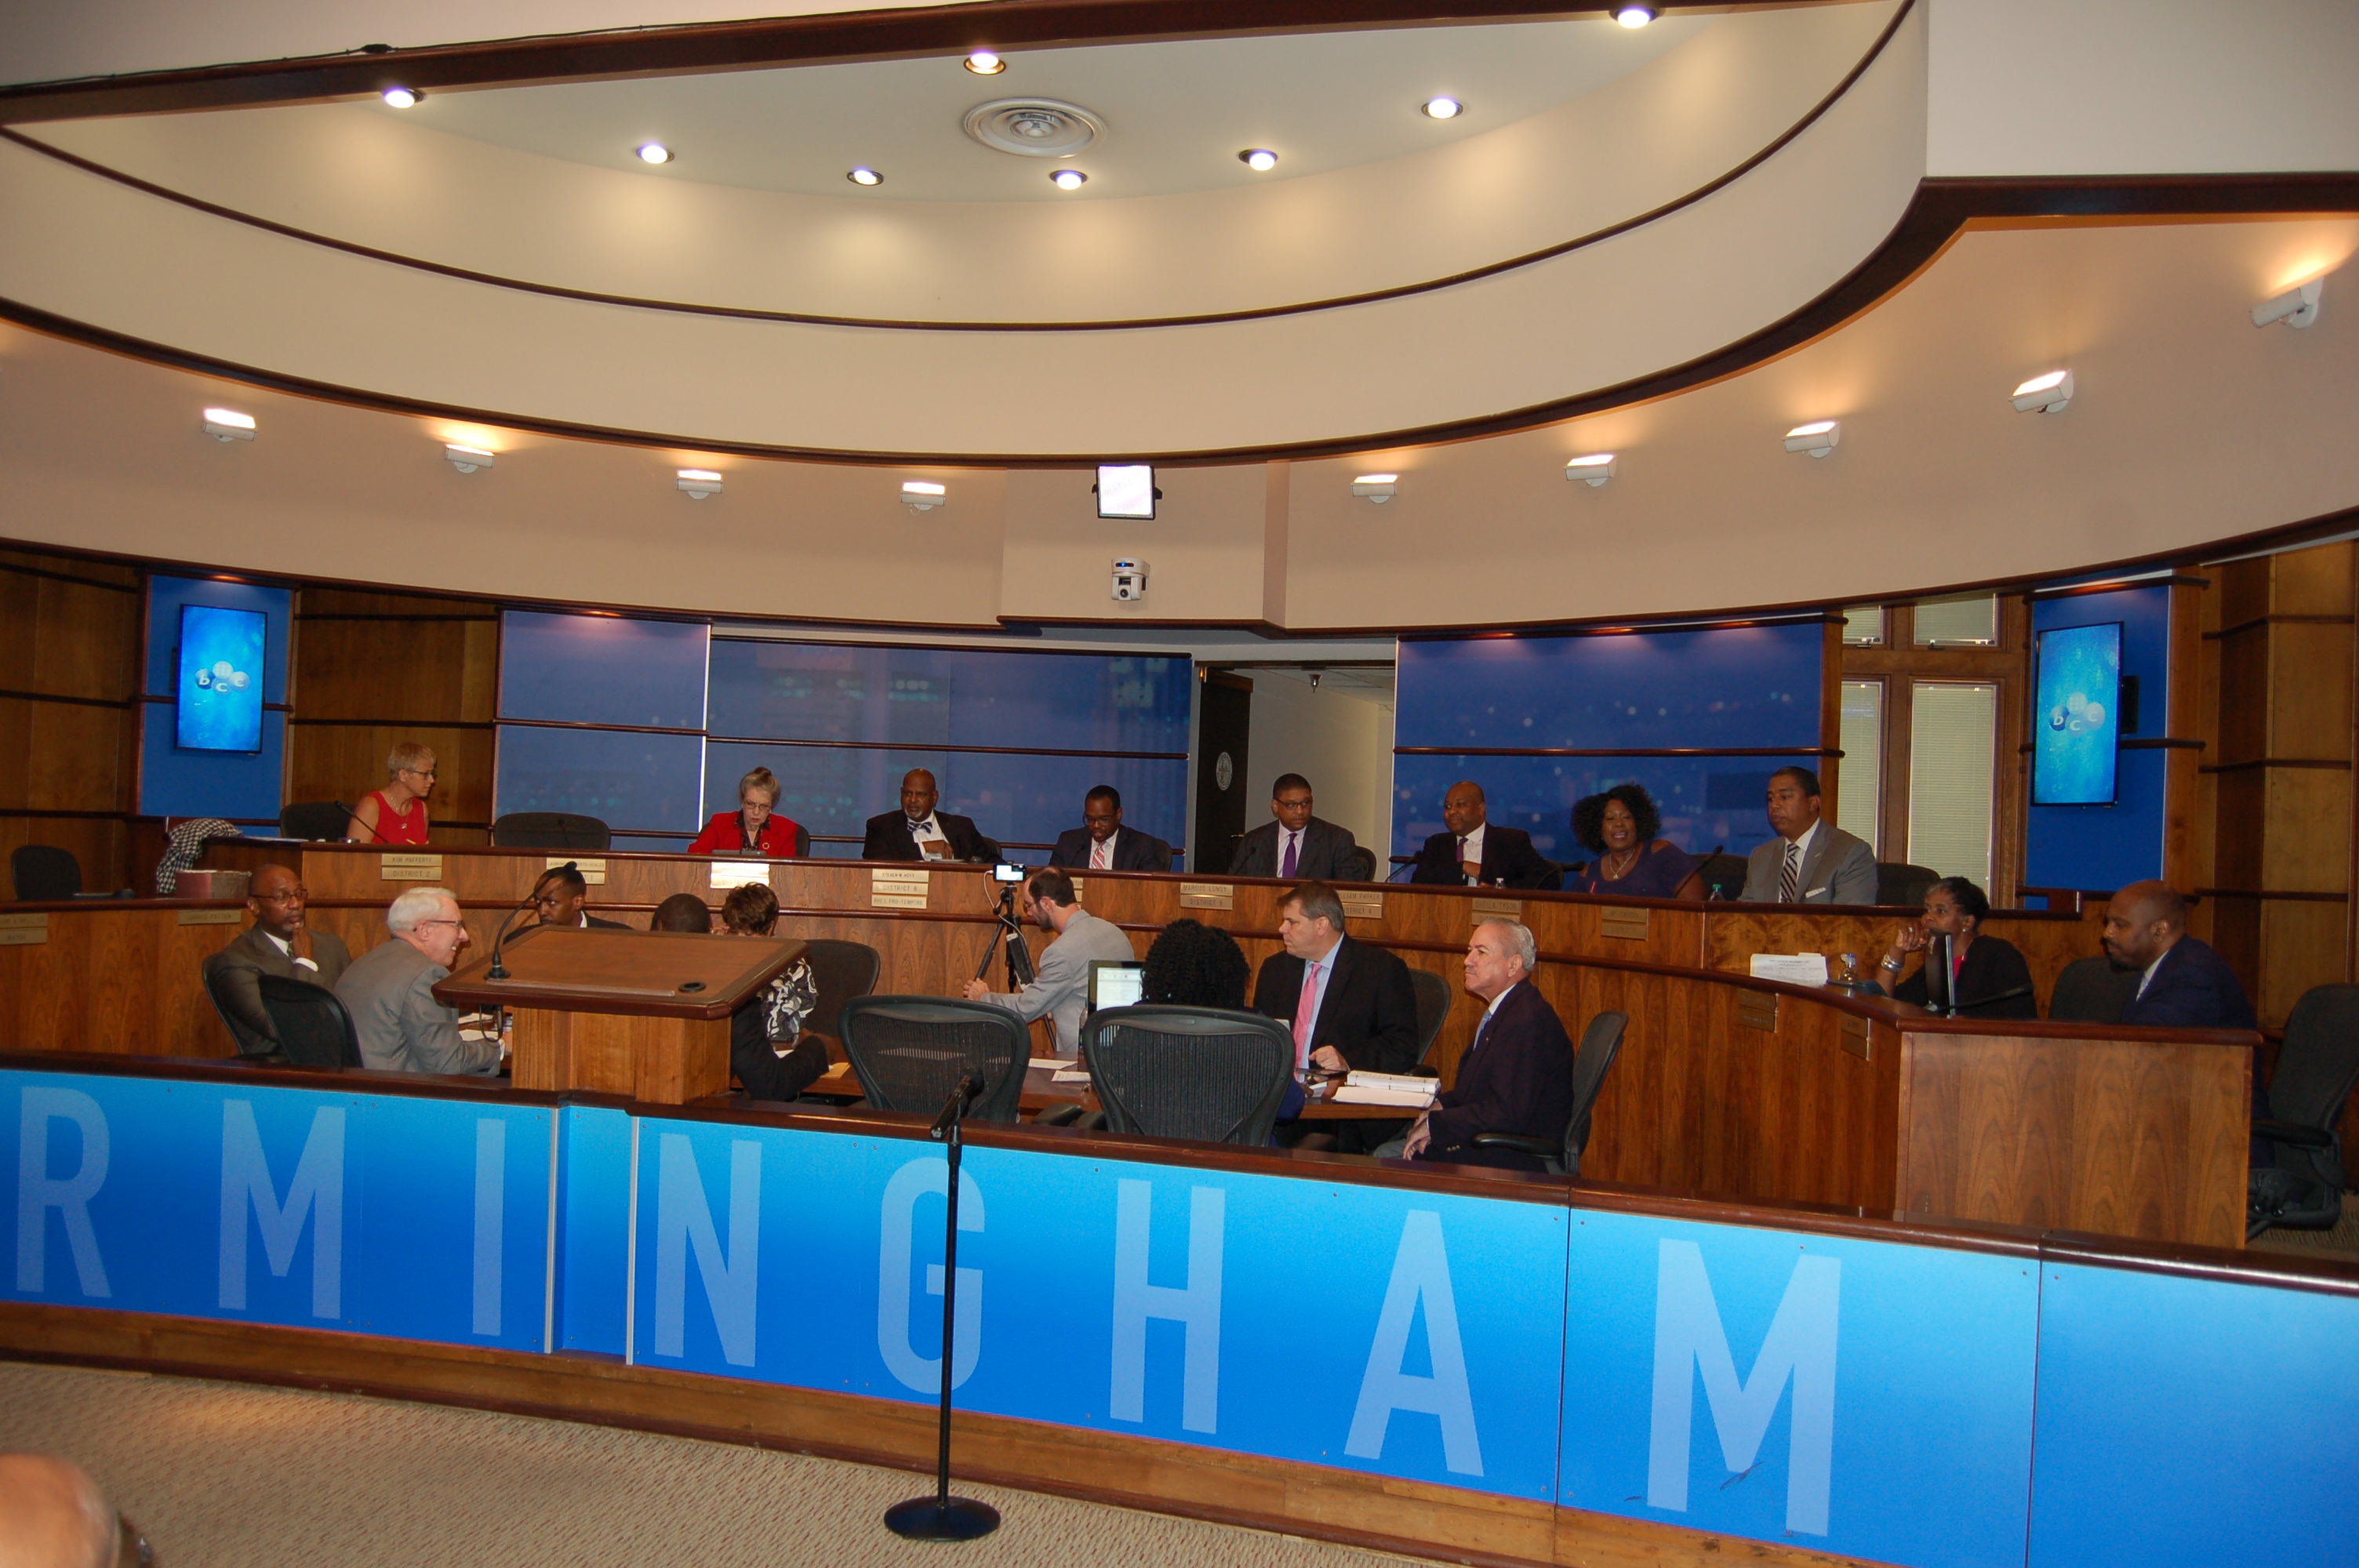 Newly appointed Birmingham City Councilors for District 1, District 6 vacant seats to be sworn in Jan 2